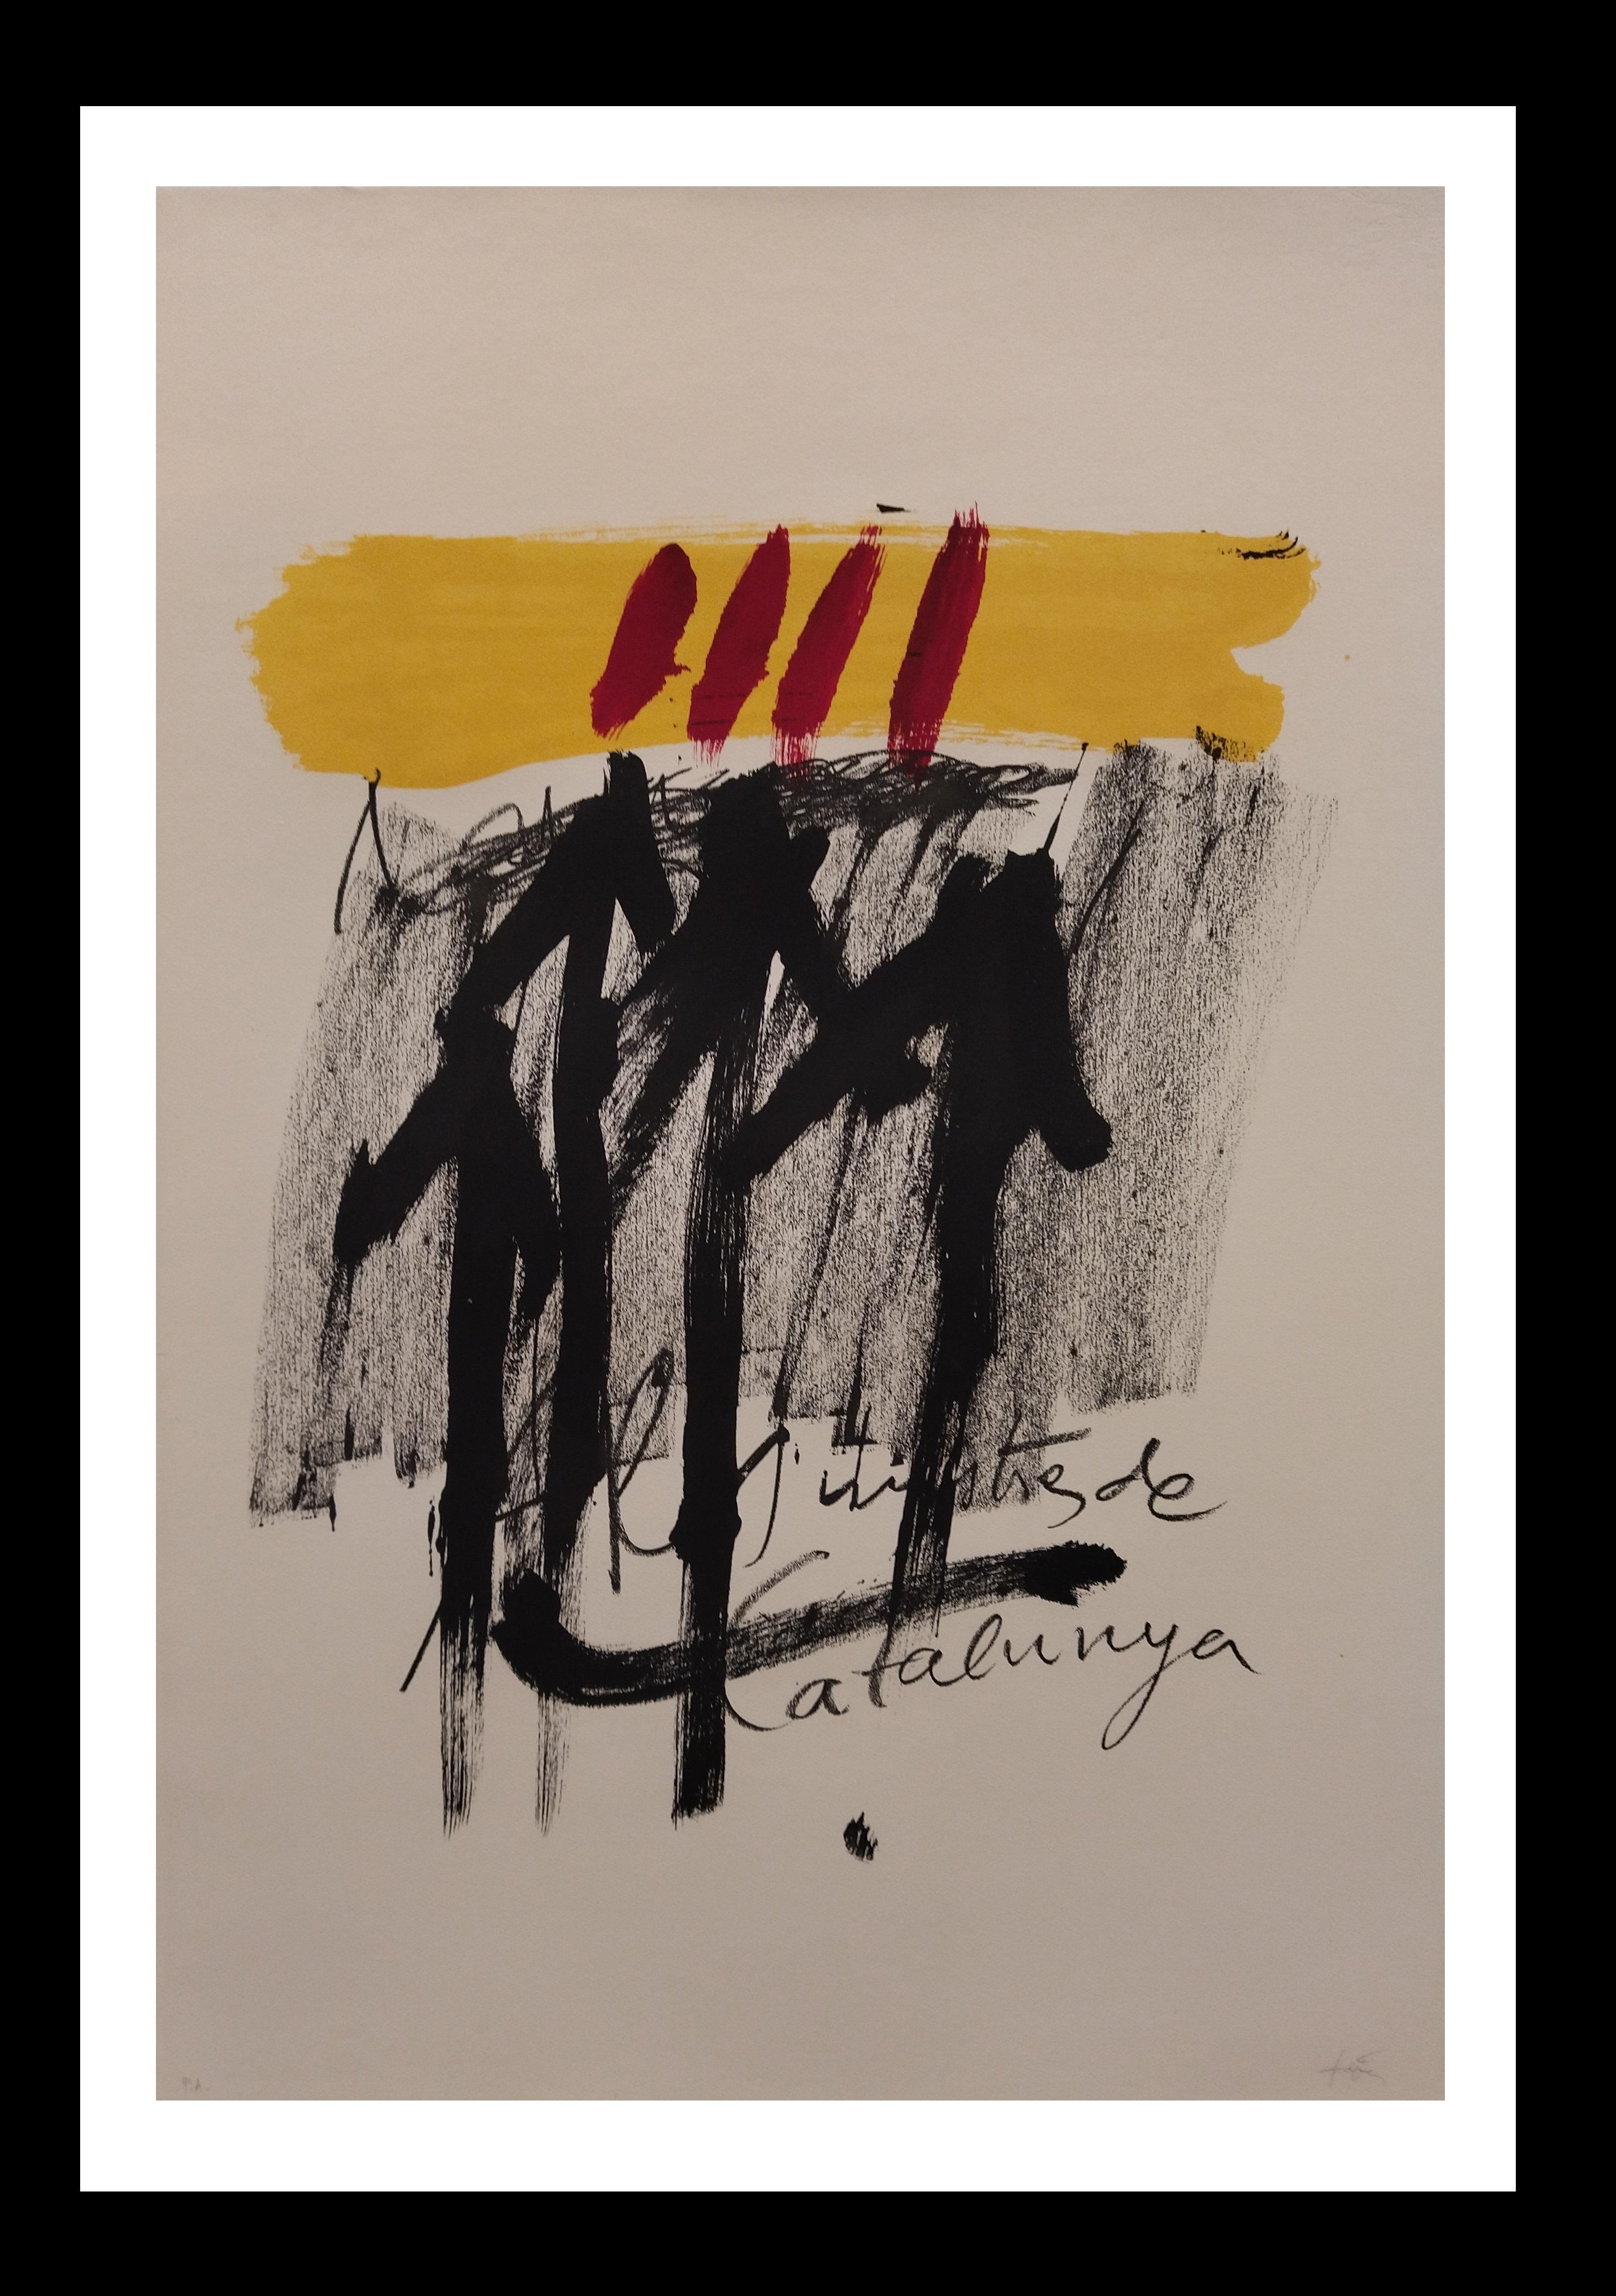  Tapies 114 Black  Red  Yellow  Vertical  original lithograph painting - Print by Antoni Tàpies